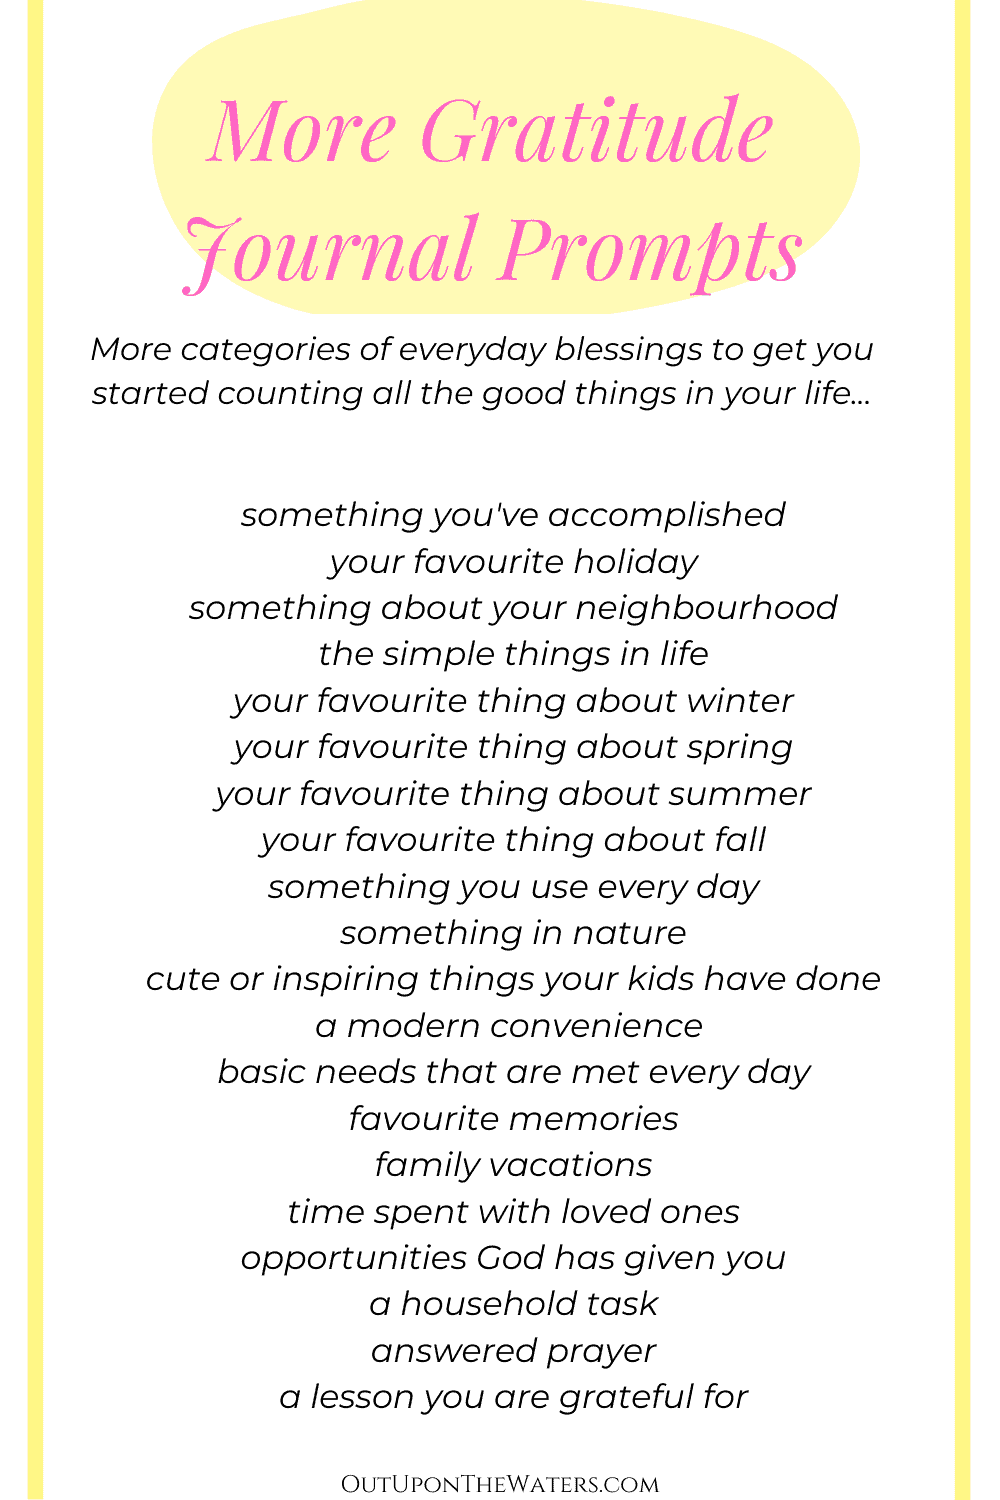 Gratitude Journal Prompts - Out Upon the Waters